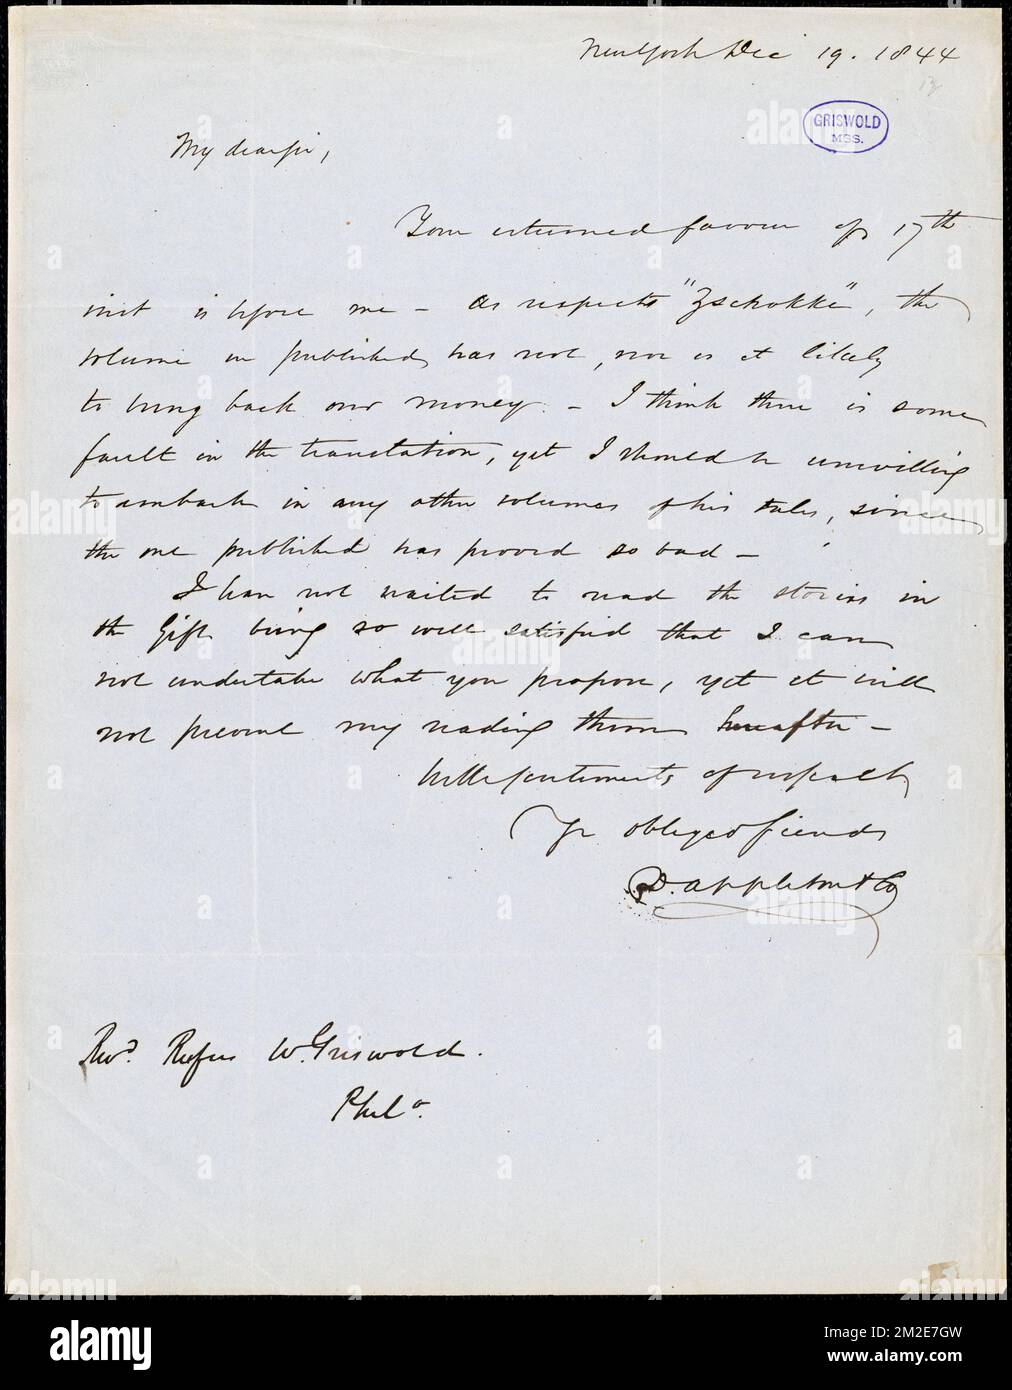 D. Appleton and Co., New York, autograph letter signed to R. W. Griswold, 19 December 1844 , American literature, 19th century, History and criticism, Authors, American, 19th century, Correspondence, Authors and publishers, Poets, American, 19th century, Correspondence, Zschokke, Heinrich, 1771-1848. Rufus W. Griswold Papers Stock Photo